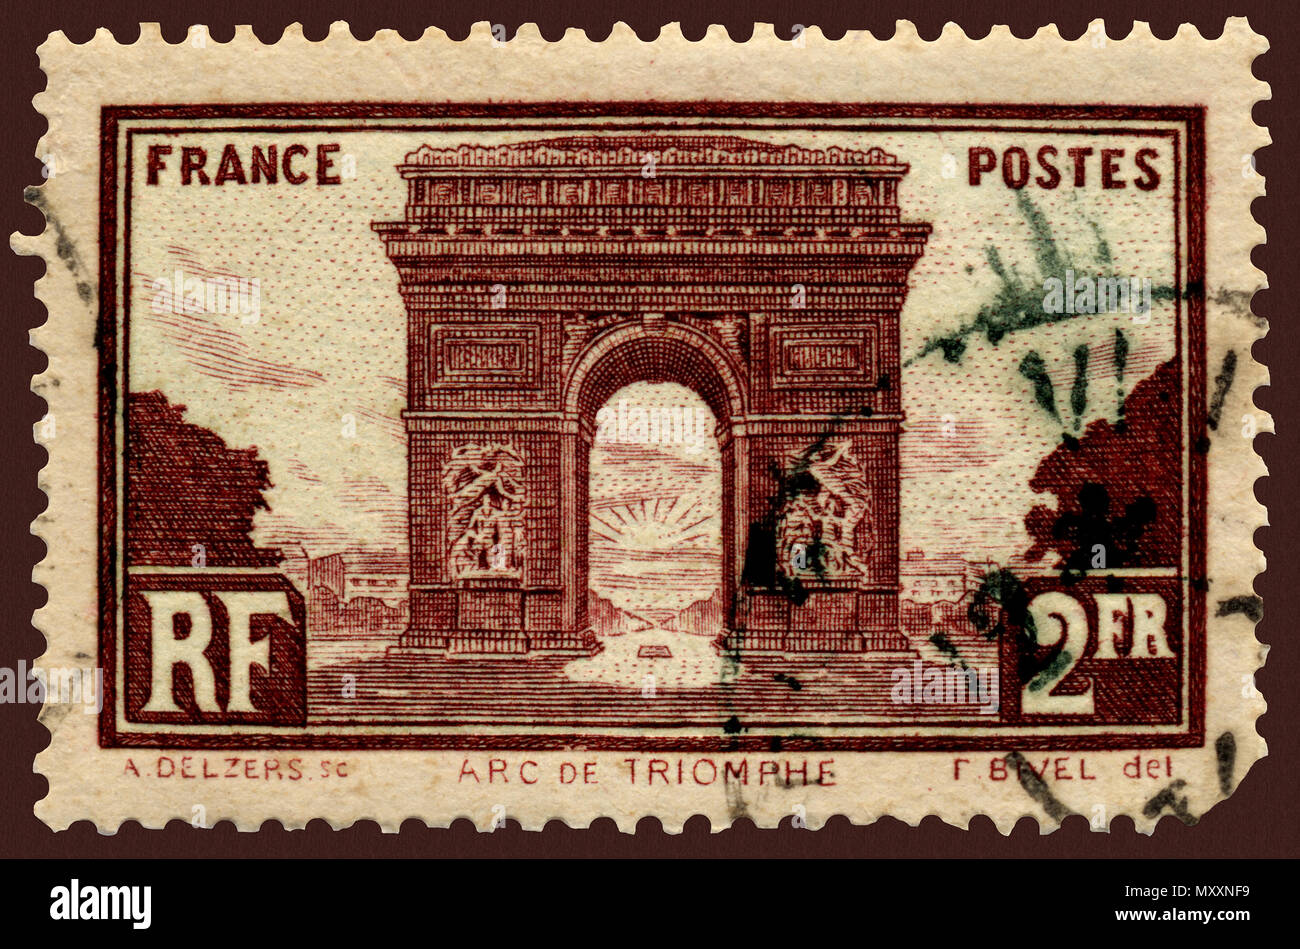 Arc de Triomphe French Postage Stamp Stock Photo